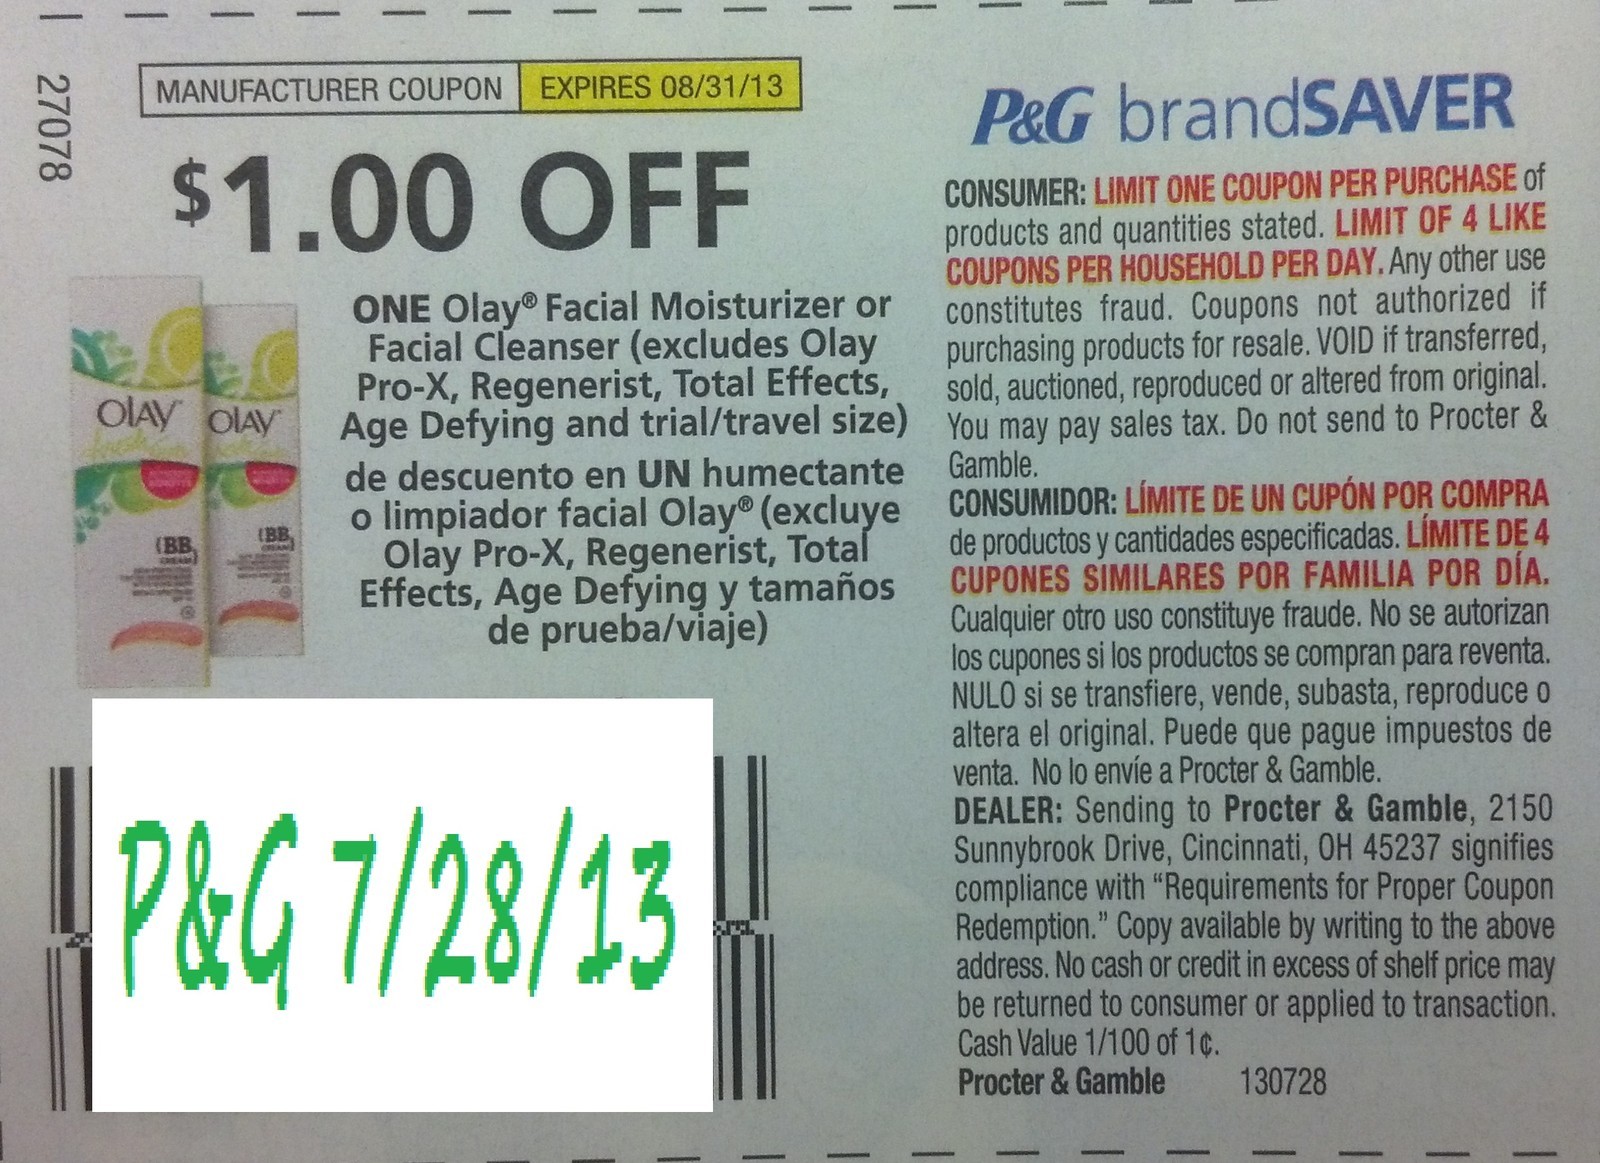 $1.00 off One Olay Facial Moisturizer or Facial Cleanser (Excludes Olay Pro-x, regenerist, total effects, age defying and trial/travel size) Expires 8-31-2013